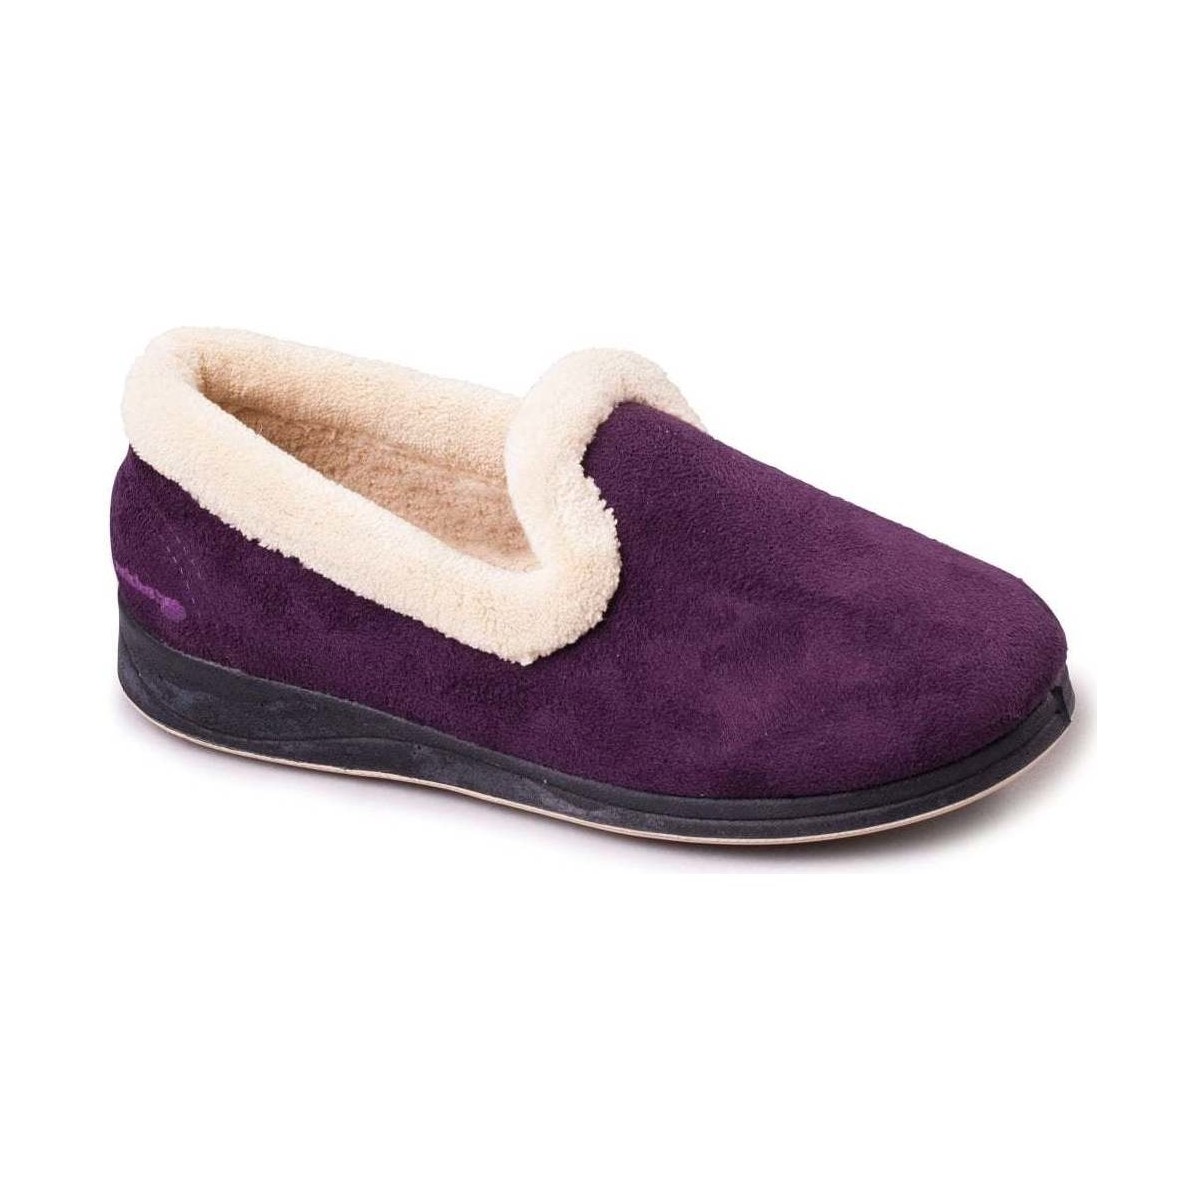 Shoes Women Slippers Padders Repose Womens Fully Lined Slippers Purple